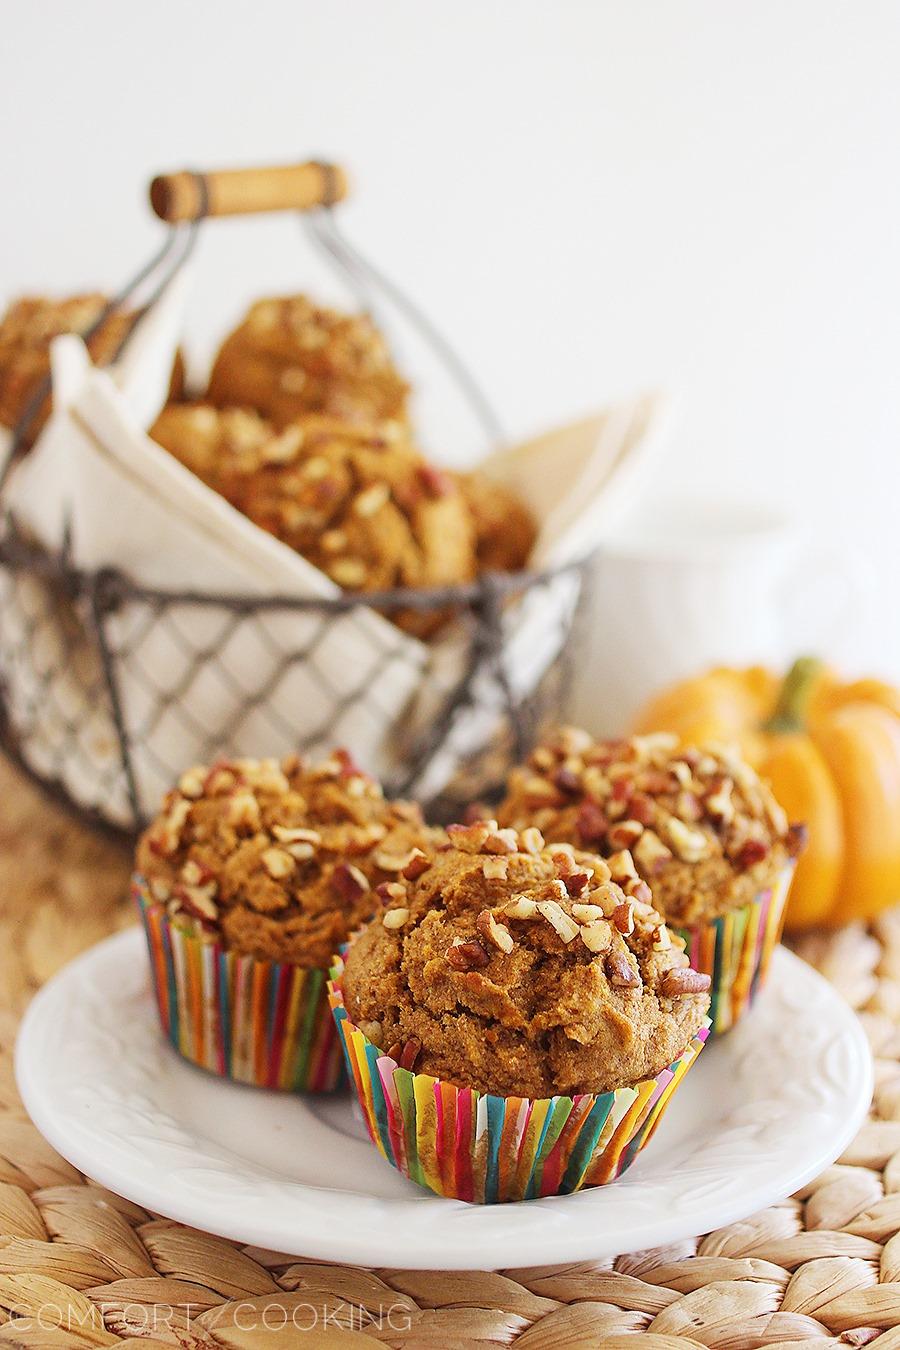 Super Soft 100% Whole Wheat Apple-Pumpkin Muffins – These spiced whole wheat apple-pumpkin muffins are easy, delicious and only need 1 bowl! | thecomfortofcooking.com